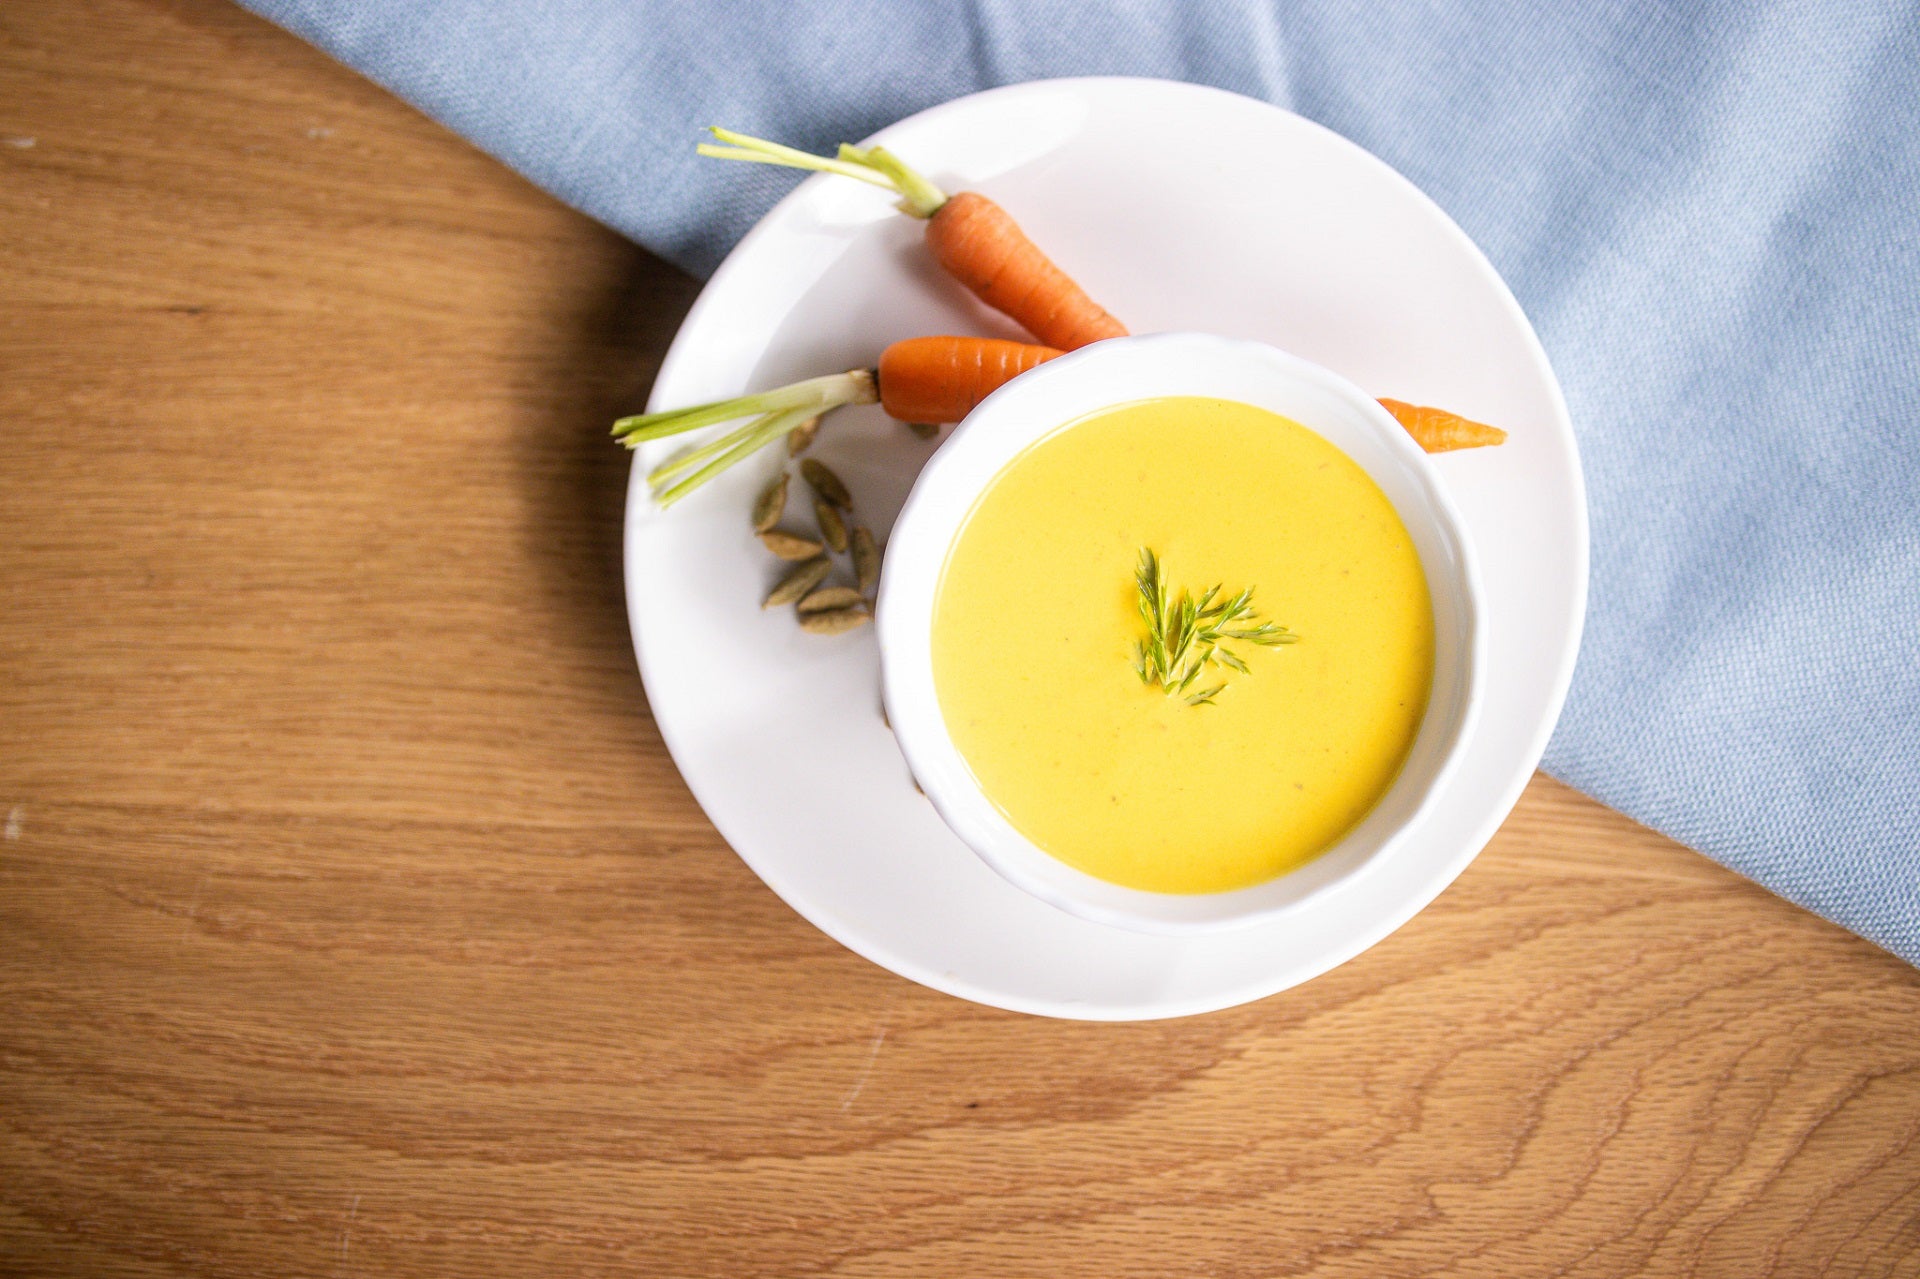 Carrot and Cardamom Soup